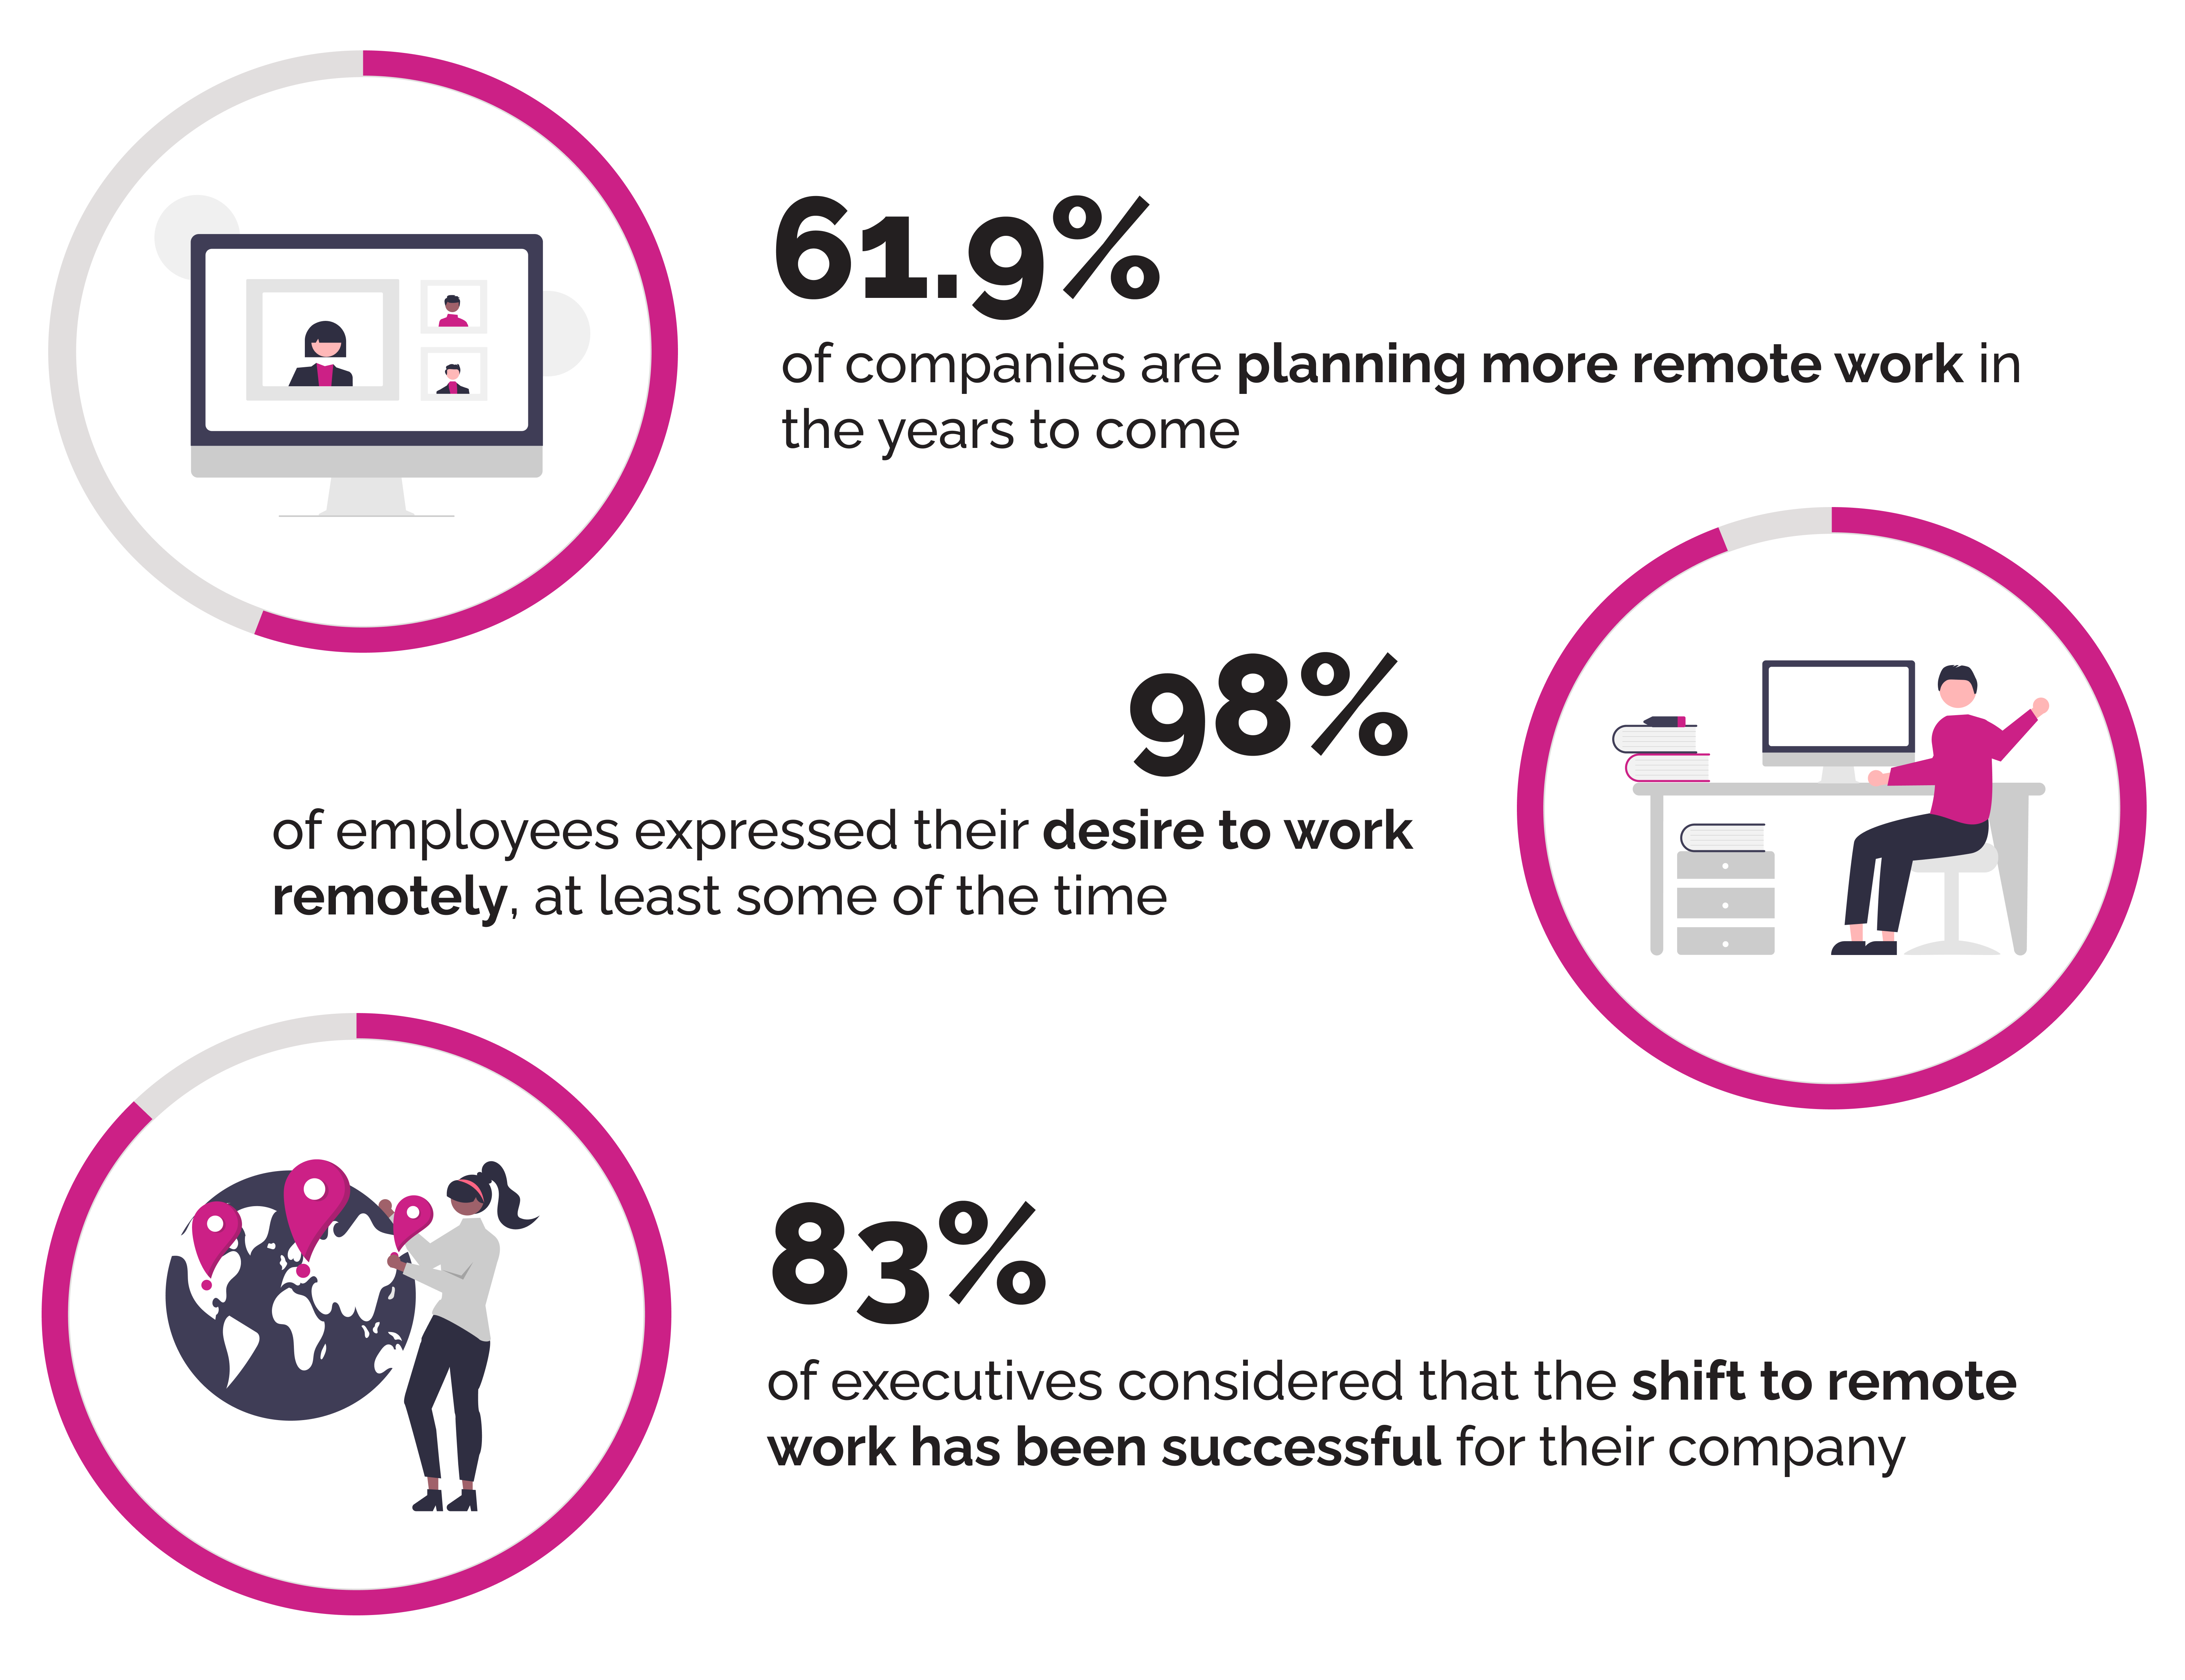 Infographic with statistics about remote work popularity.